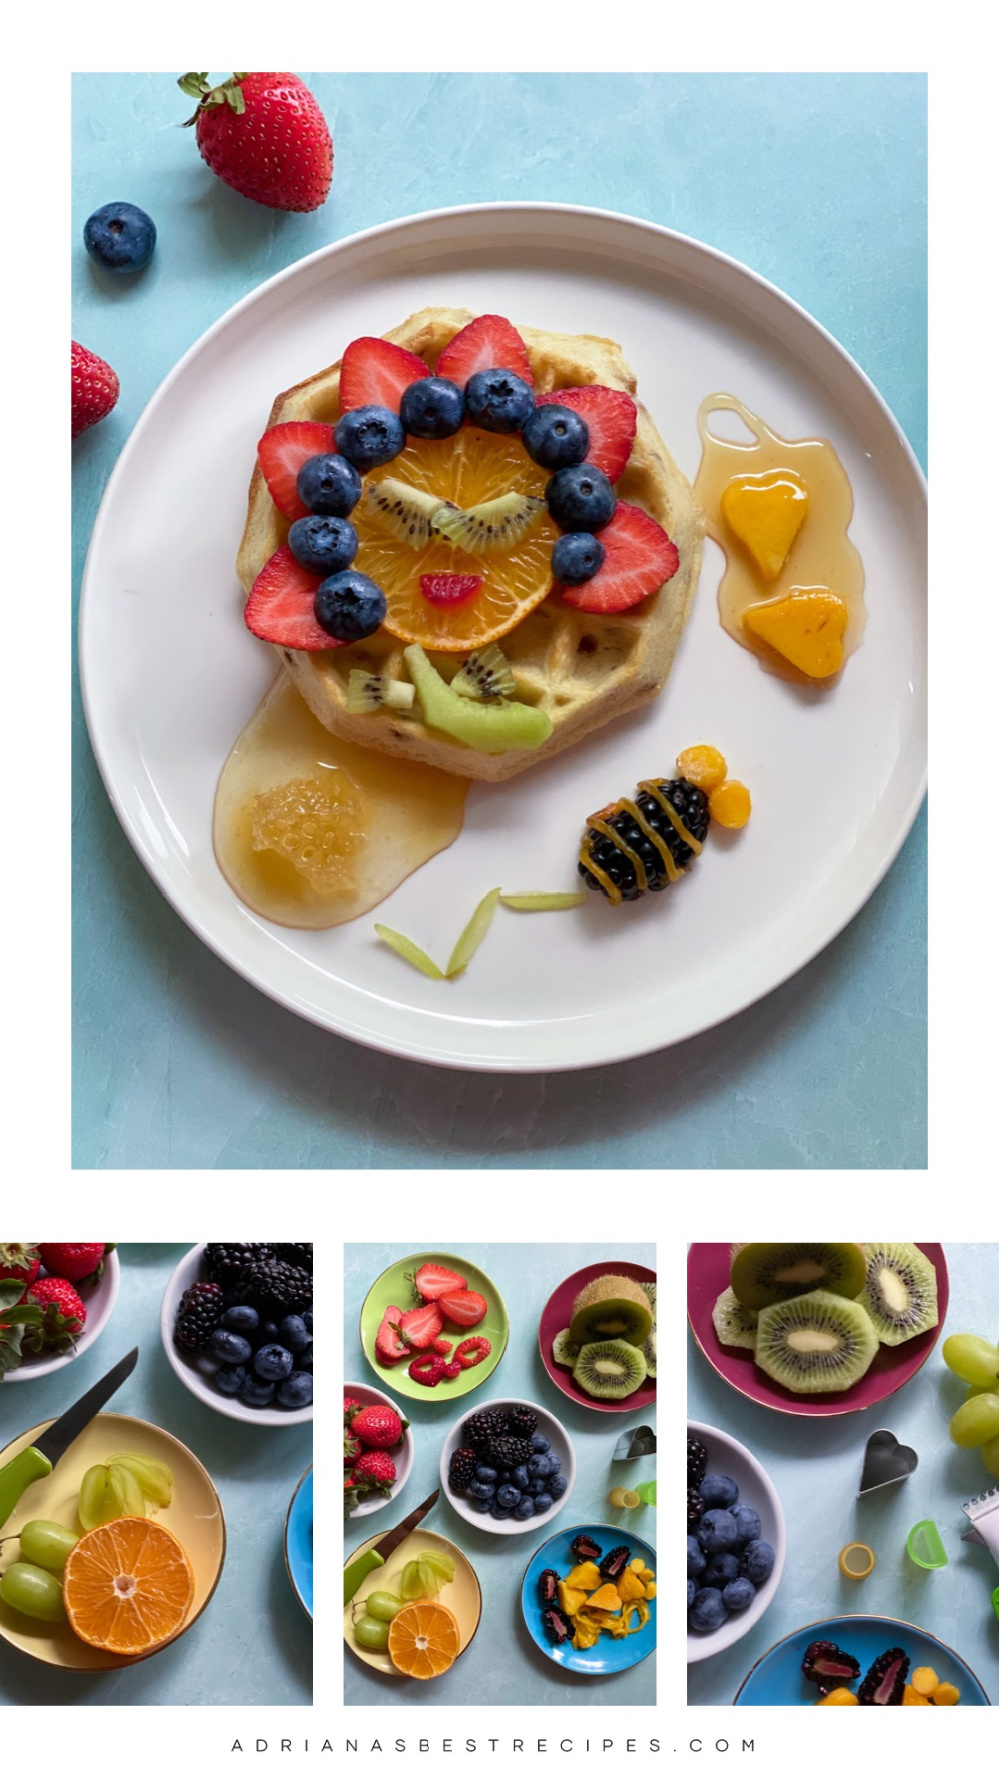 a collage showing the different elements for the decorative breakfast waffles